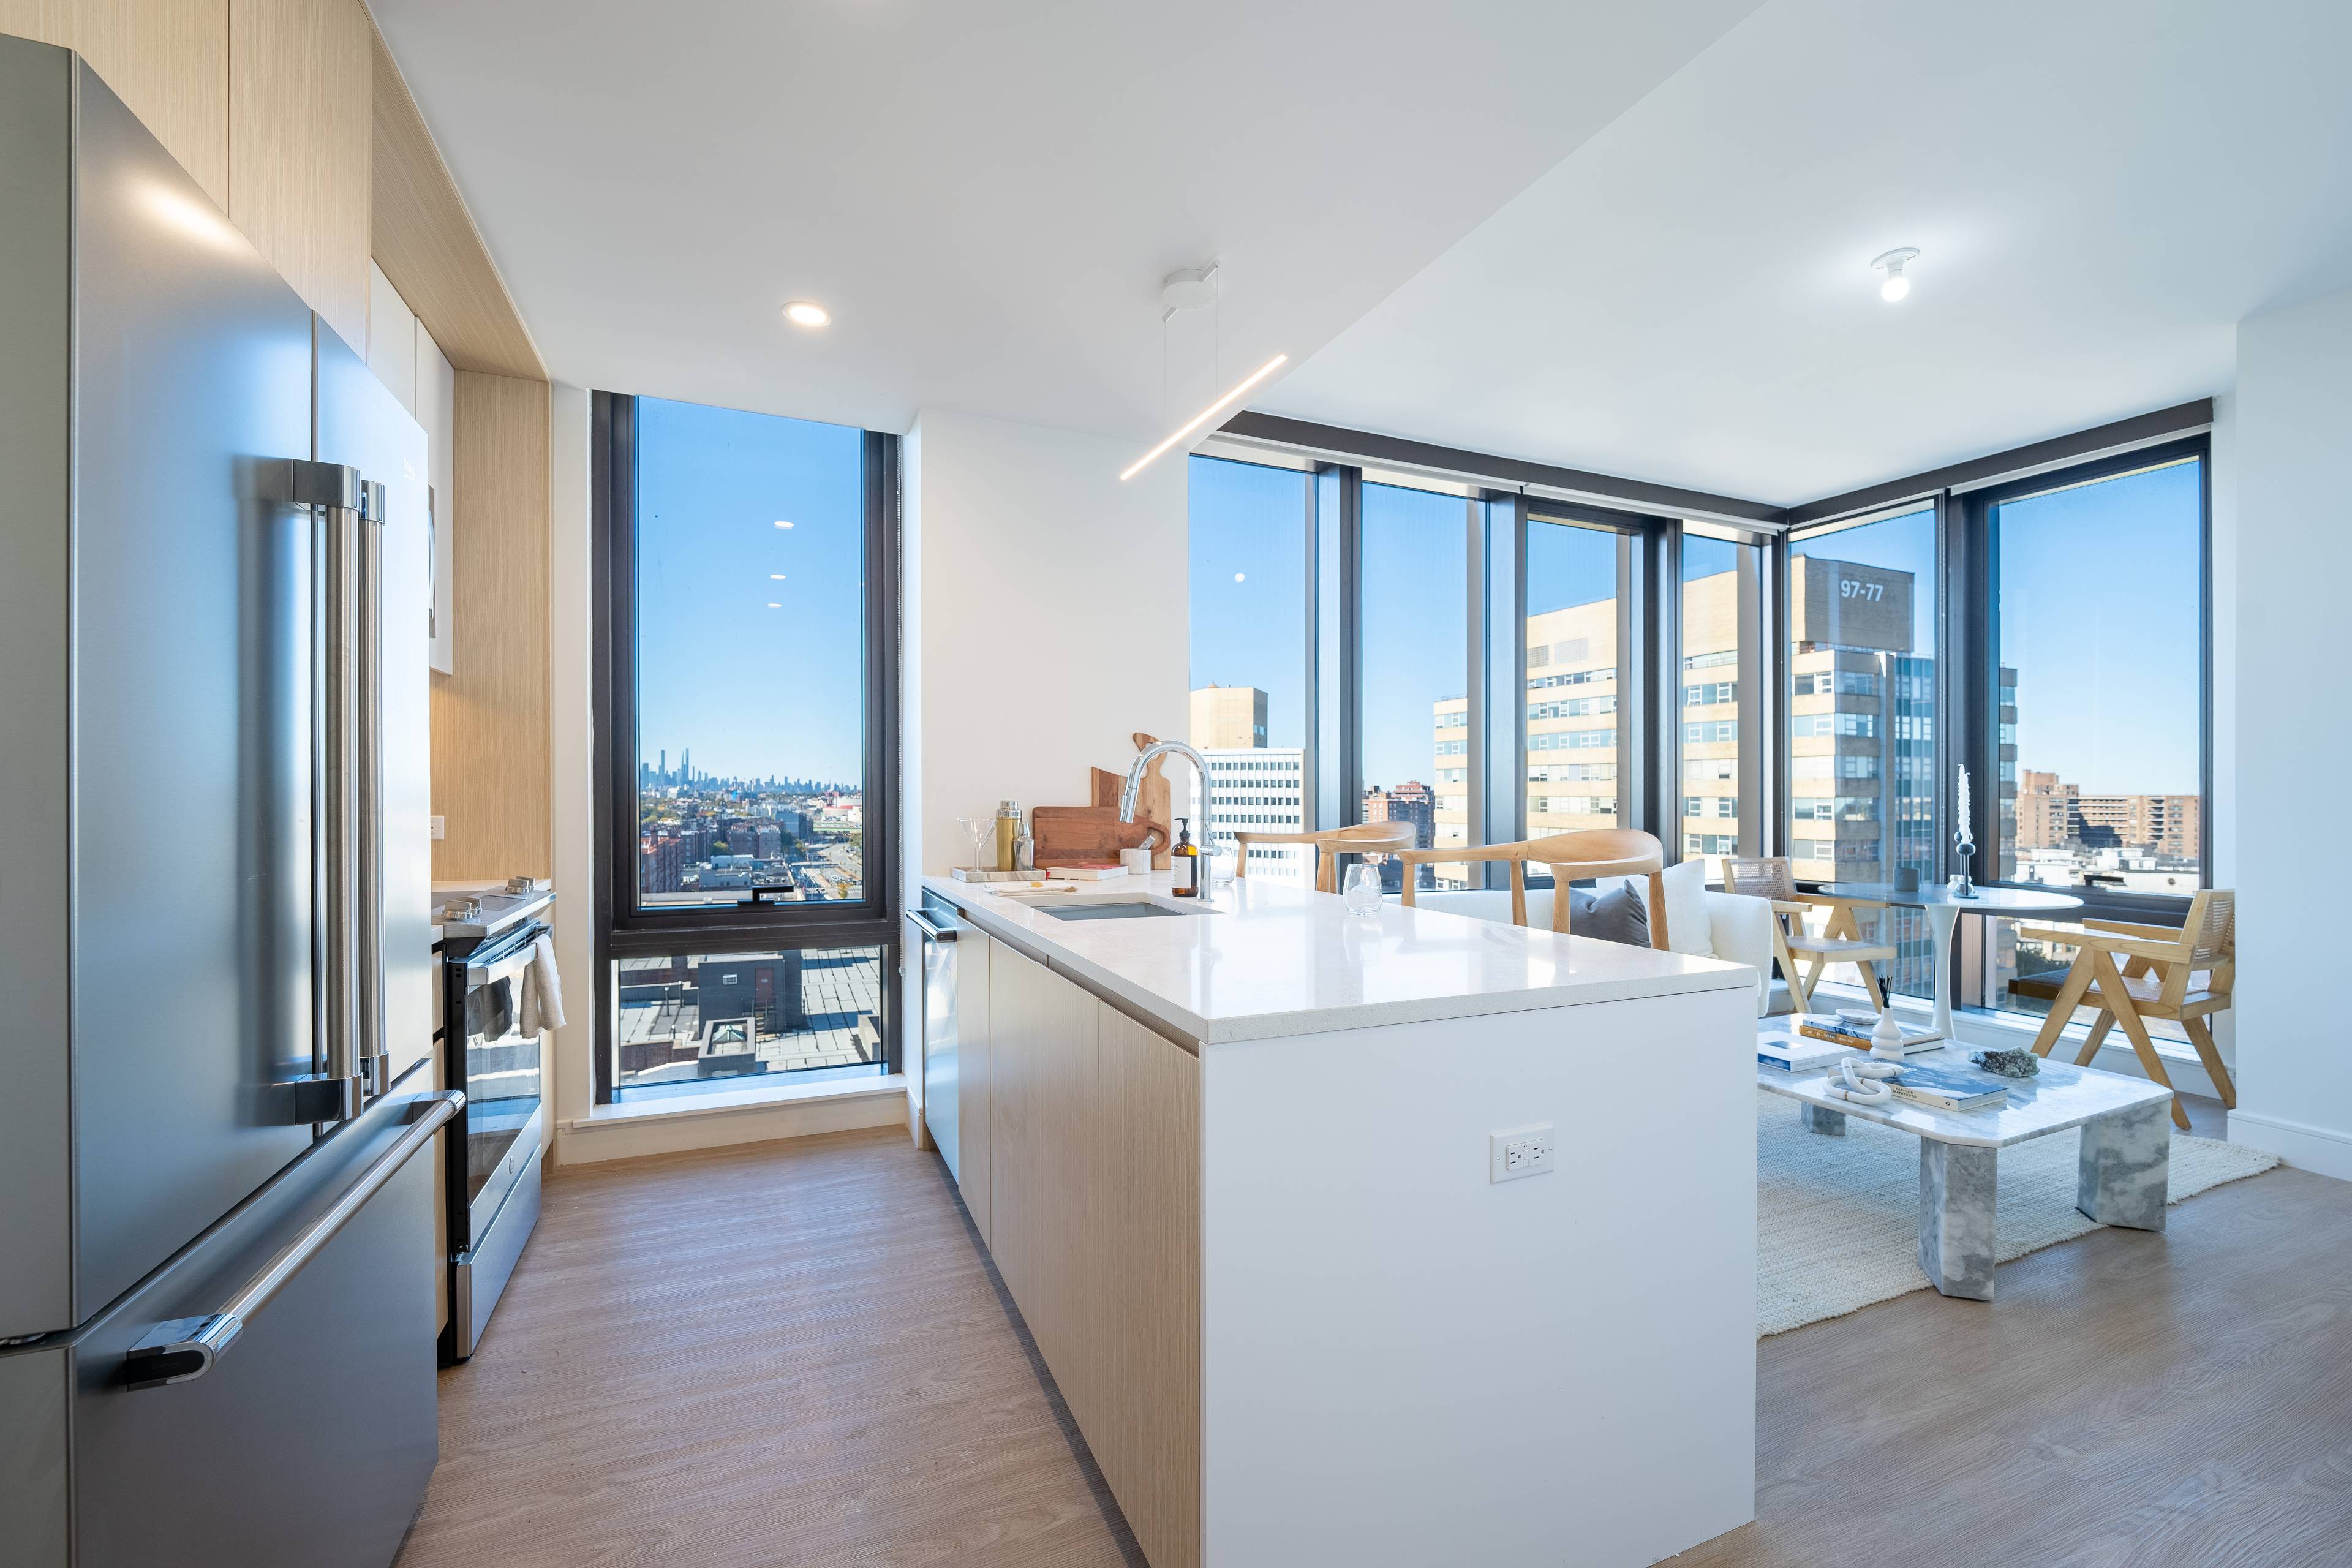 NEW DEVELOPMENT LUXURY RENTAL TOWER WITH FULL -SERVICE AMENITIES